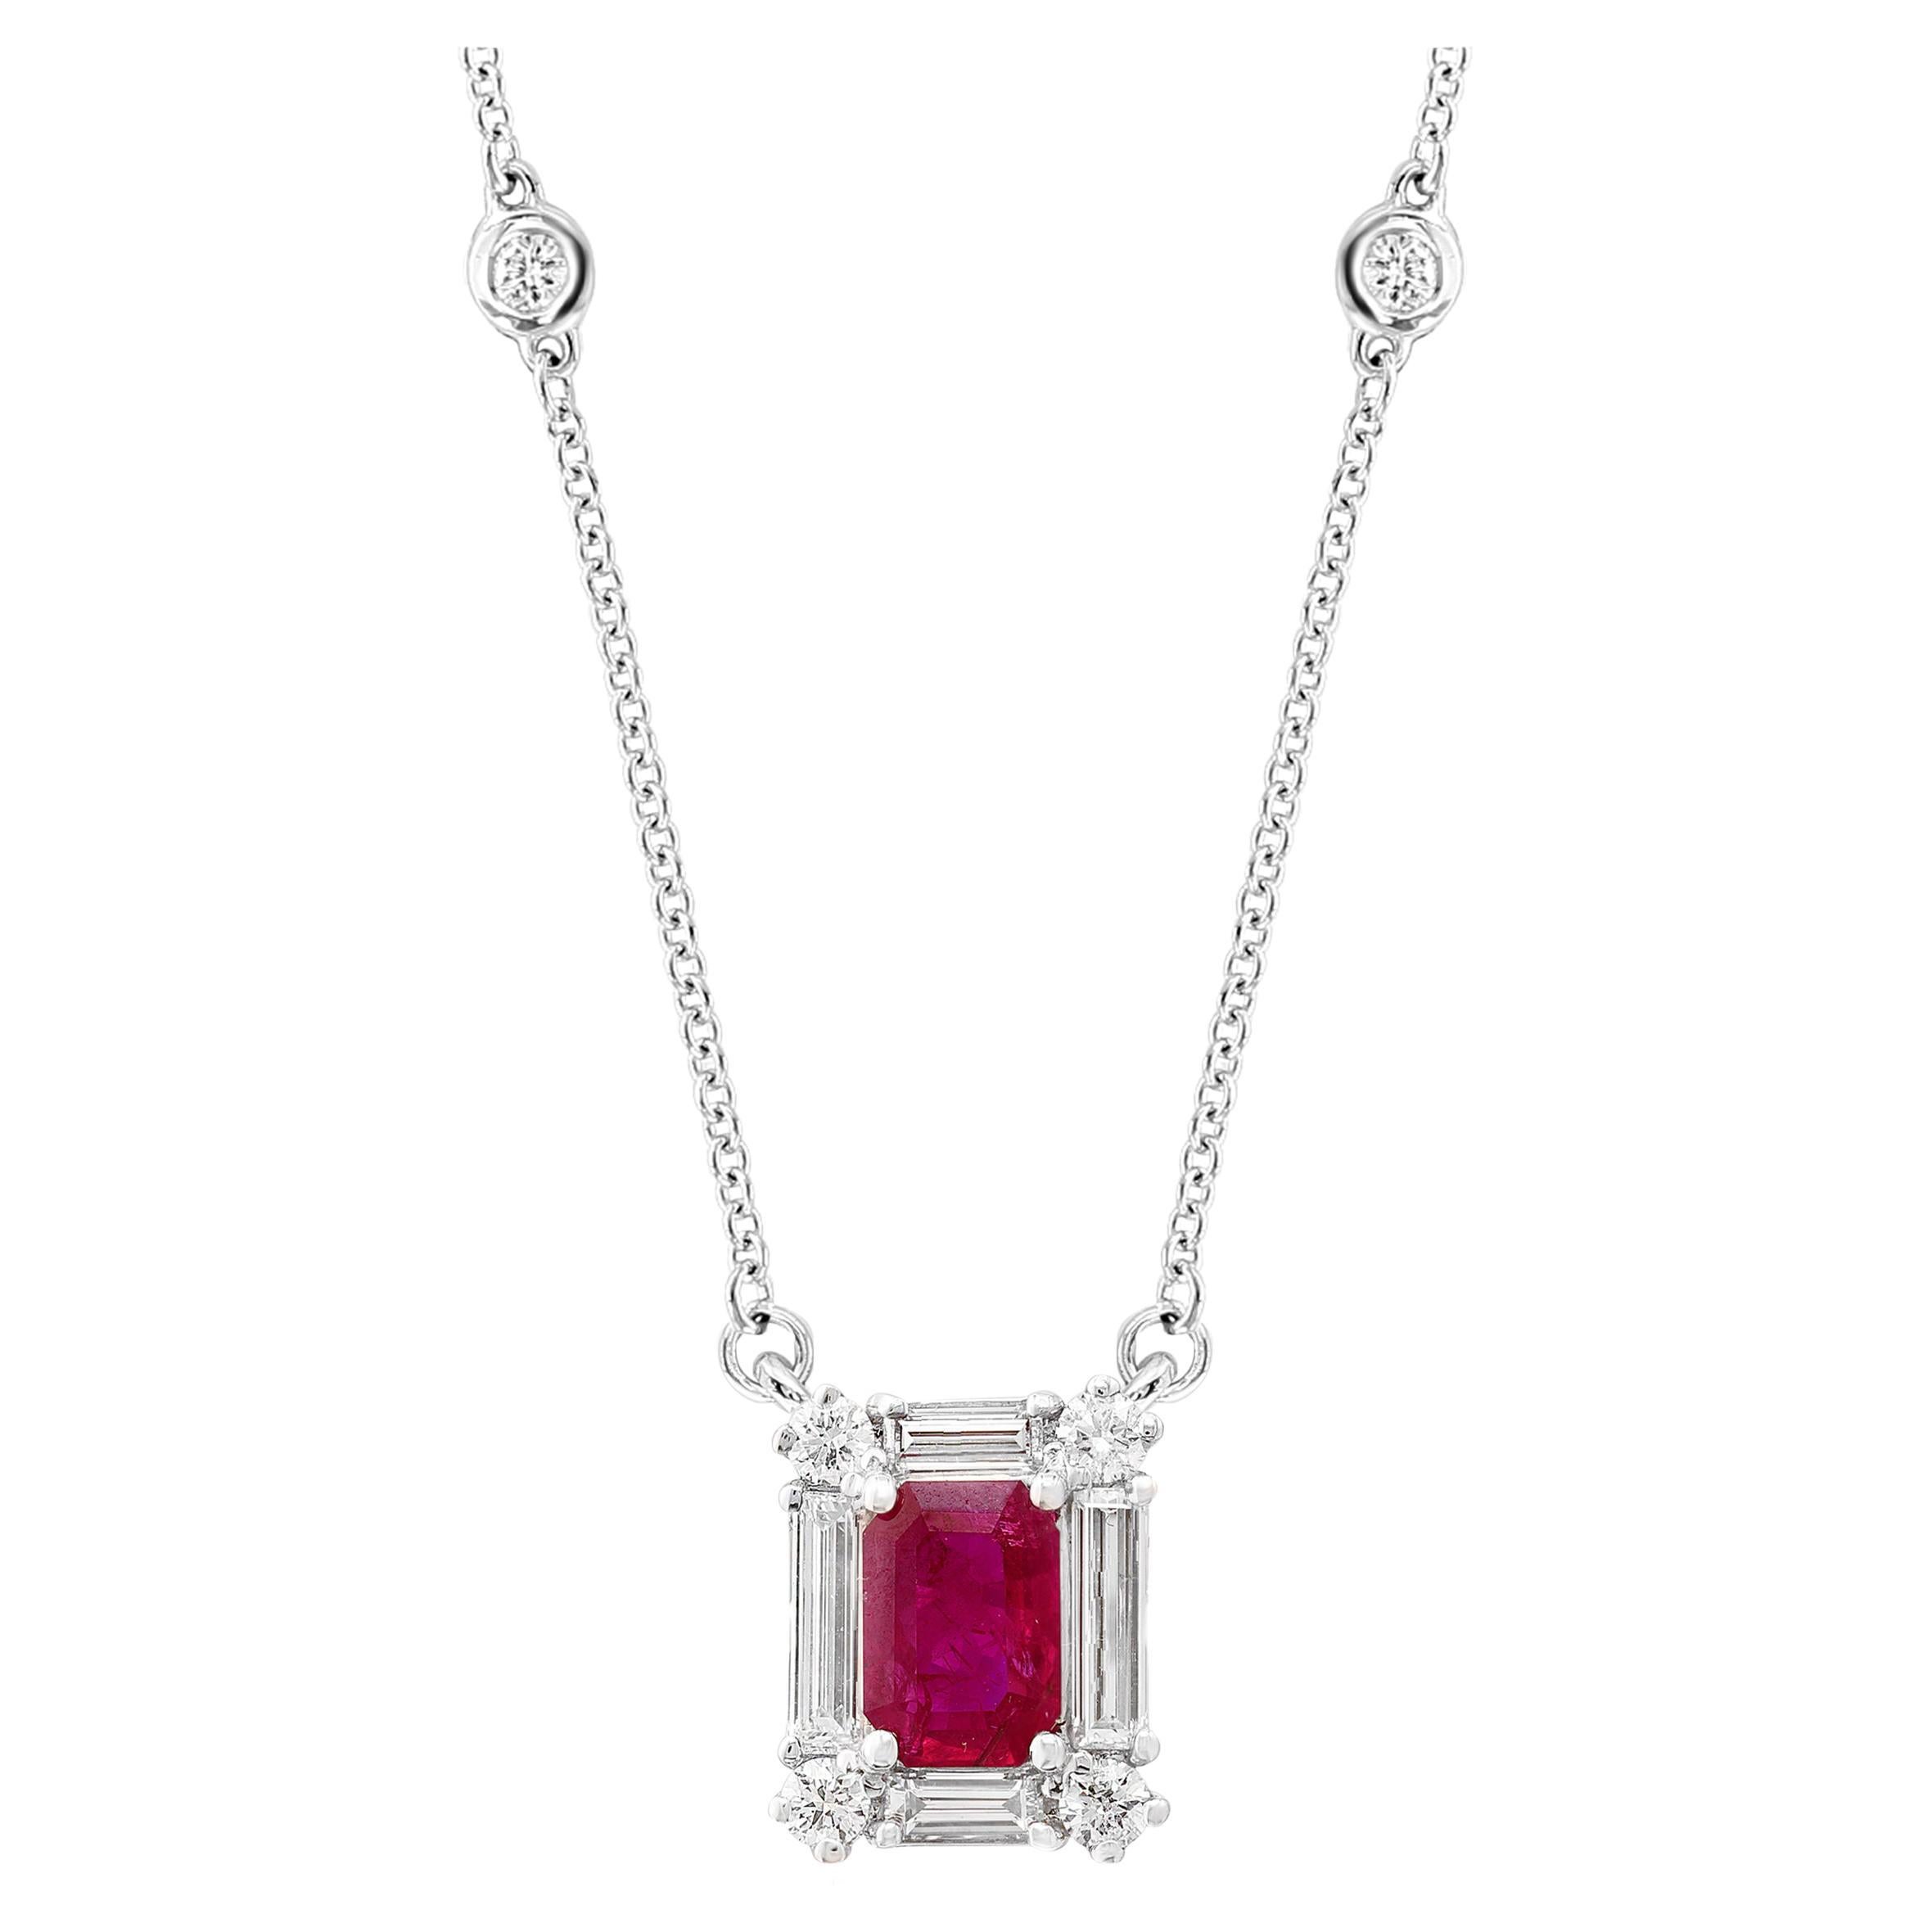 0.79 Carat Emerald Cut Ruby and Diamond Pendant Necklace in 14K White Gold For Sale